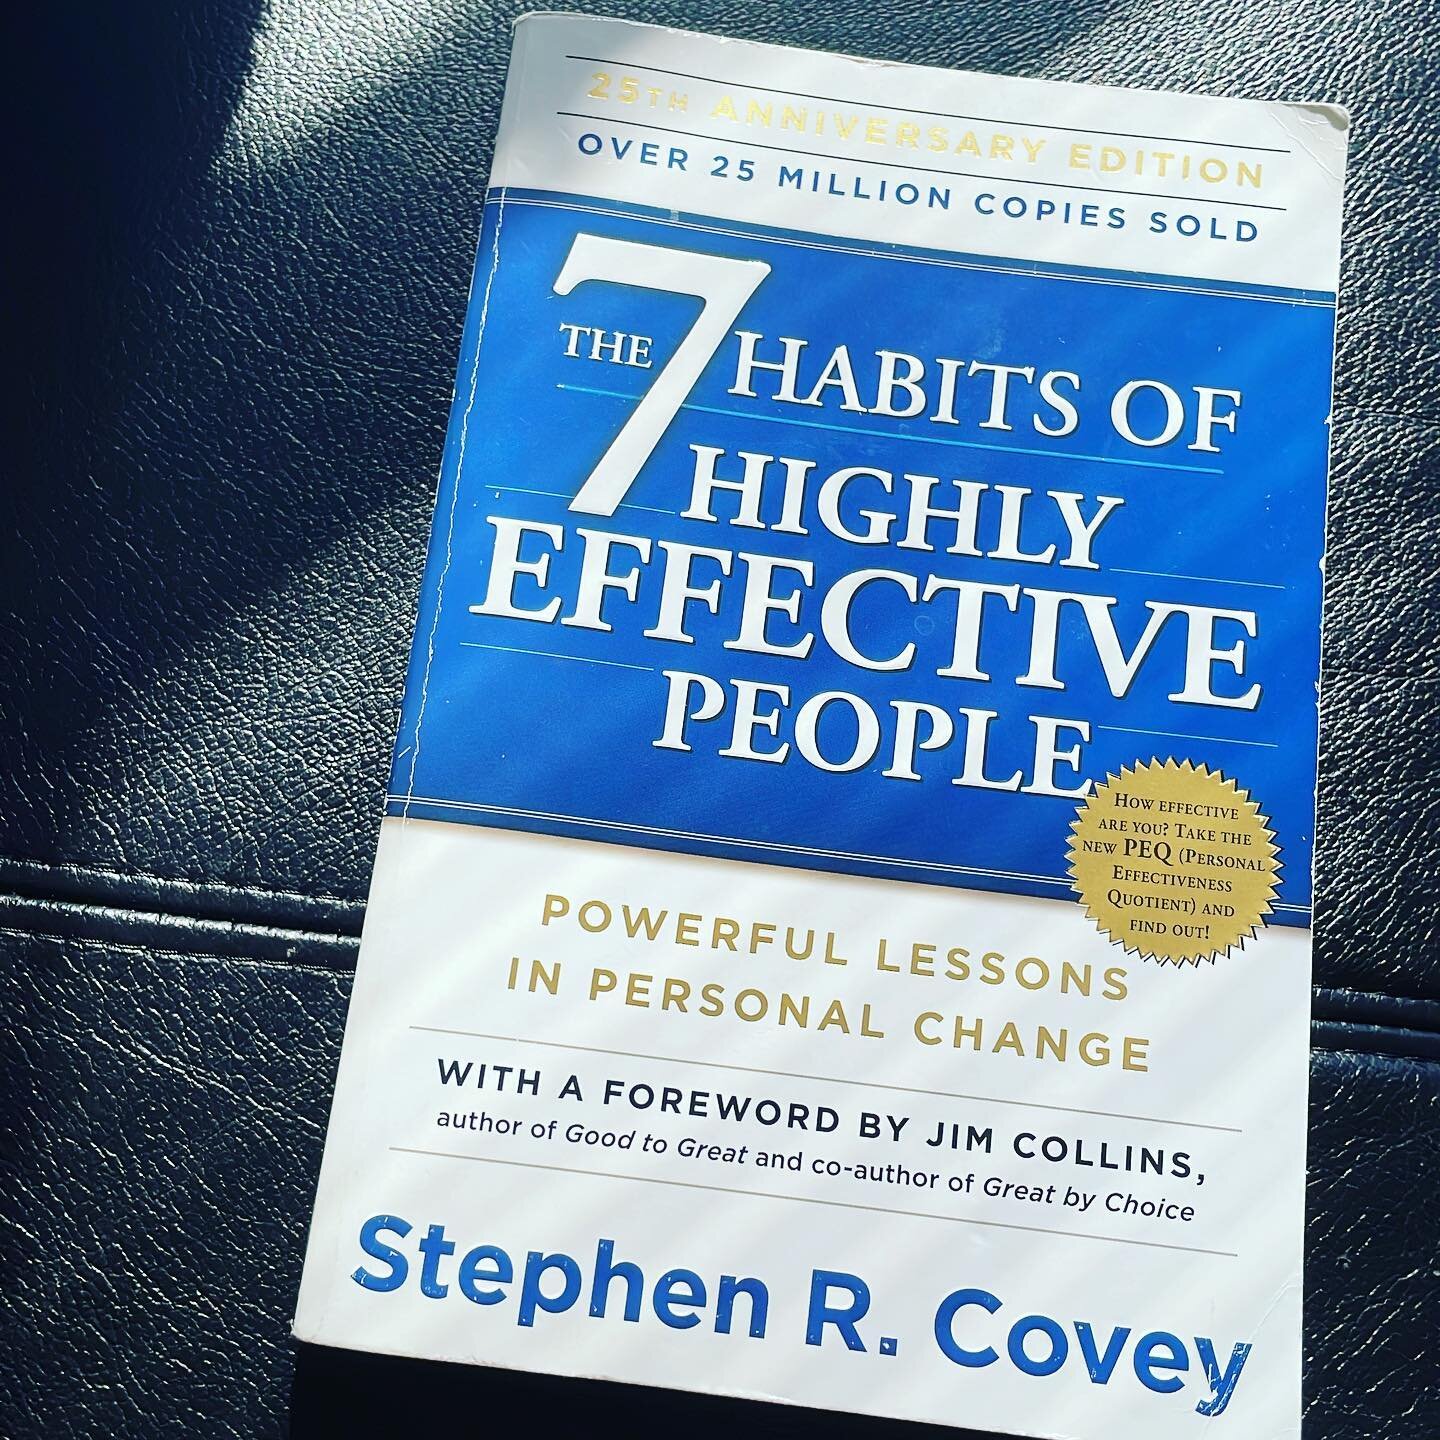 Revisiting an oldie but a goodie! 
.
.
.
. #7habitsofhighlyeffectivepeople  #productivity #selfdevelopment  #selfimprovement #neverstoplearning #actorlife #wellness #wellnessjourney #getbetter #ilovebooks #selfawareness #humanjourney #margiemoment #g